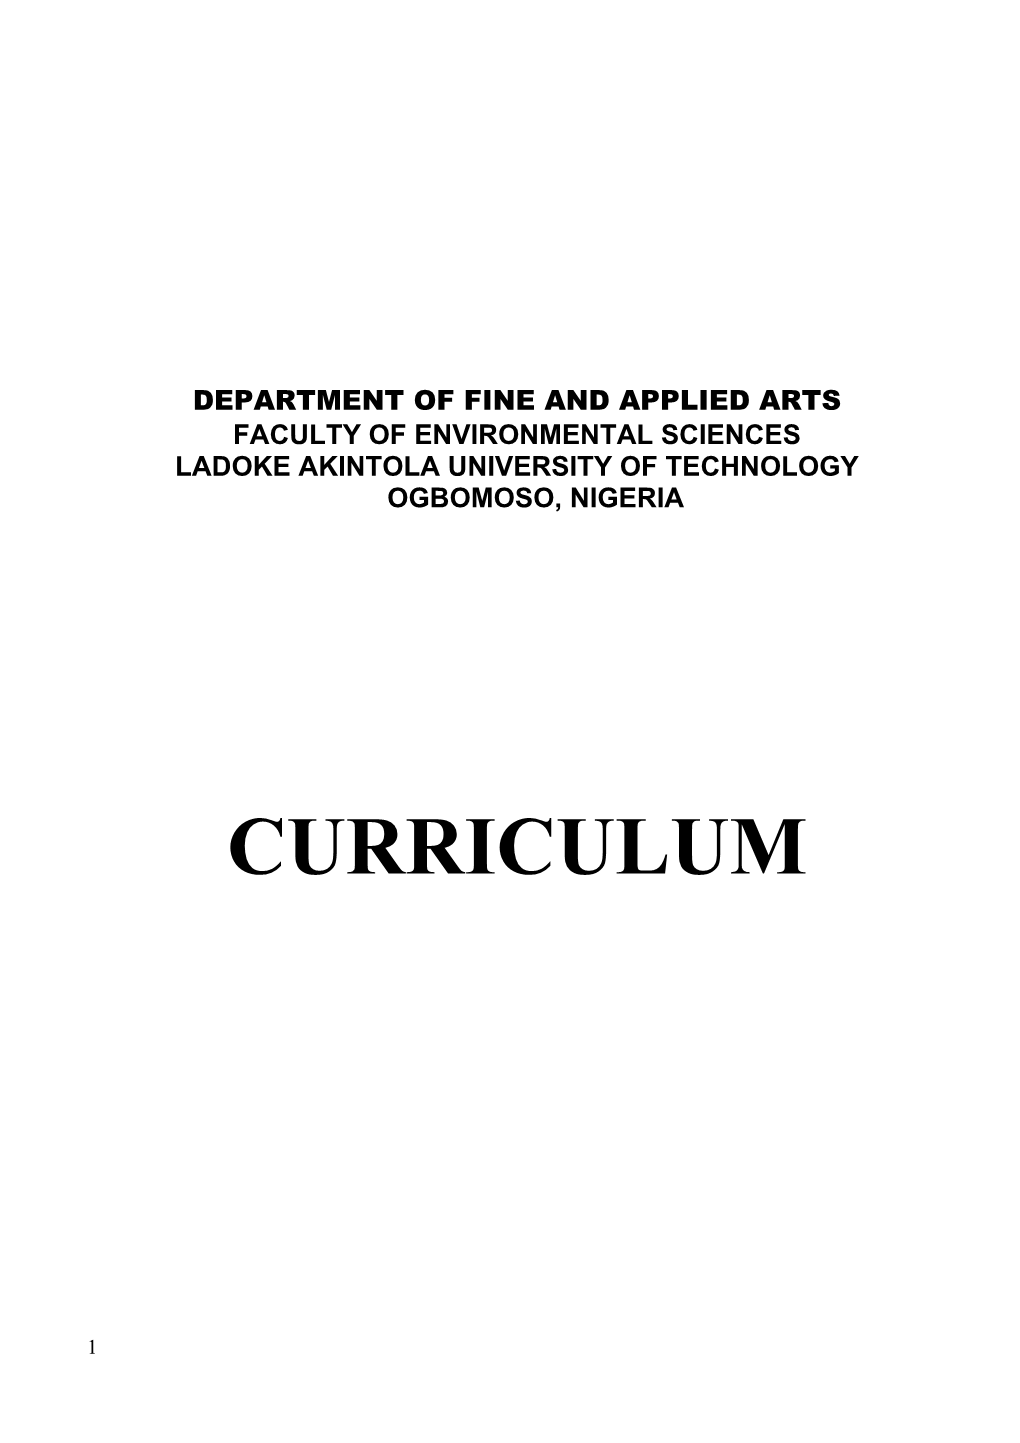 Department of Fine and Applied Arts